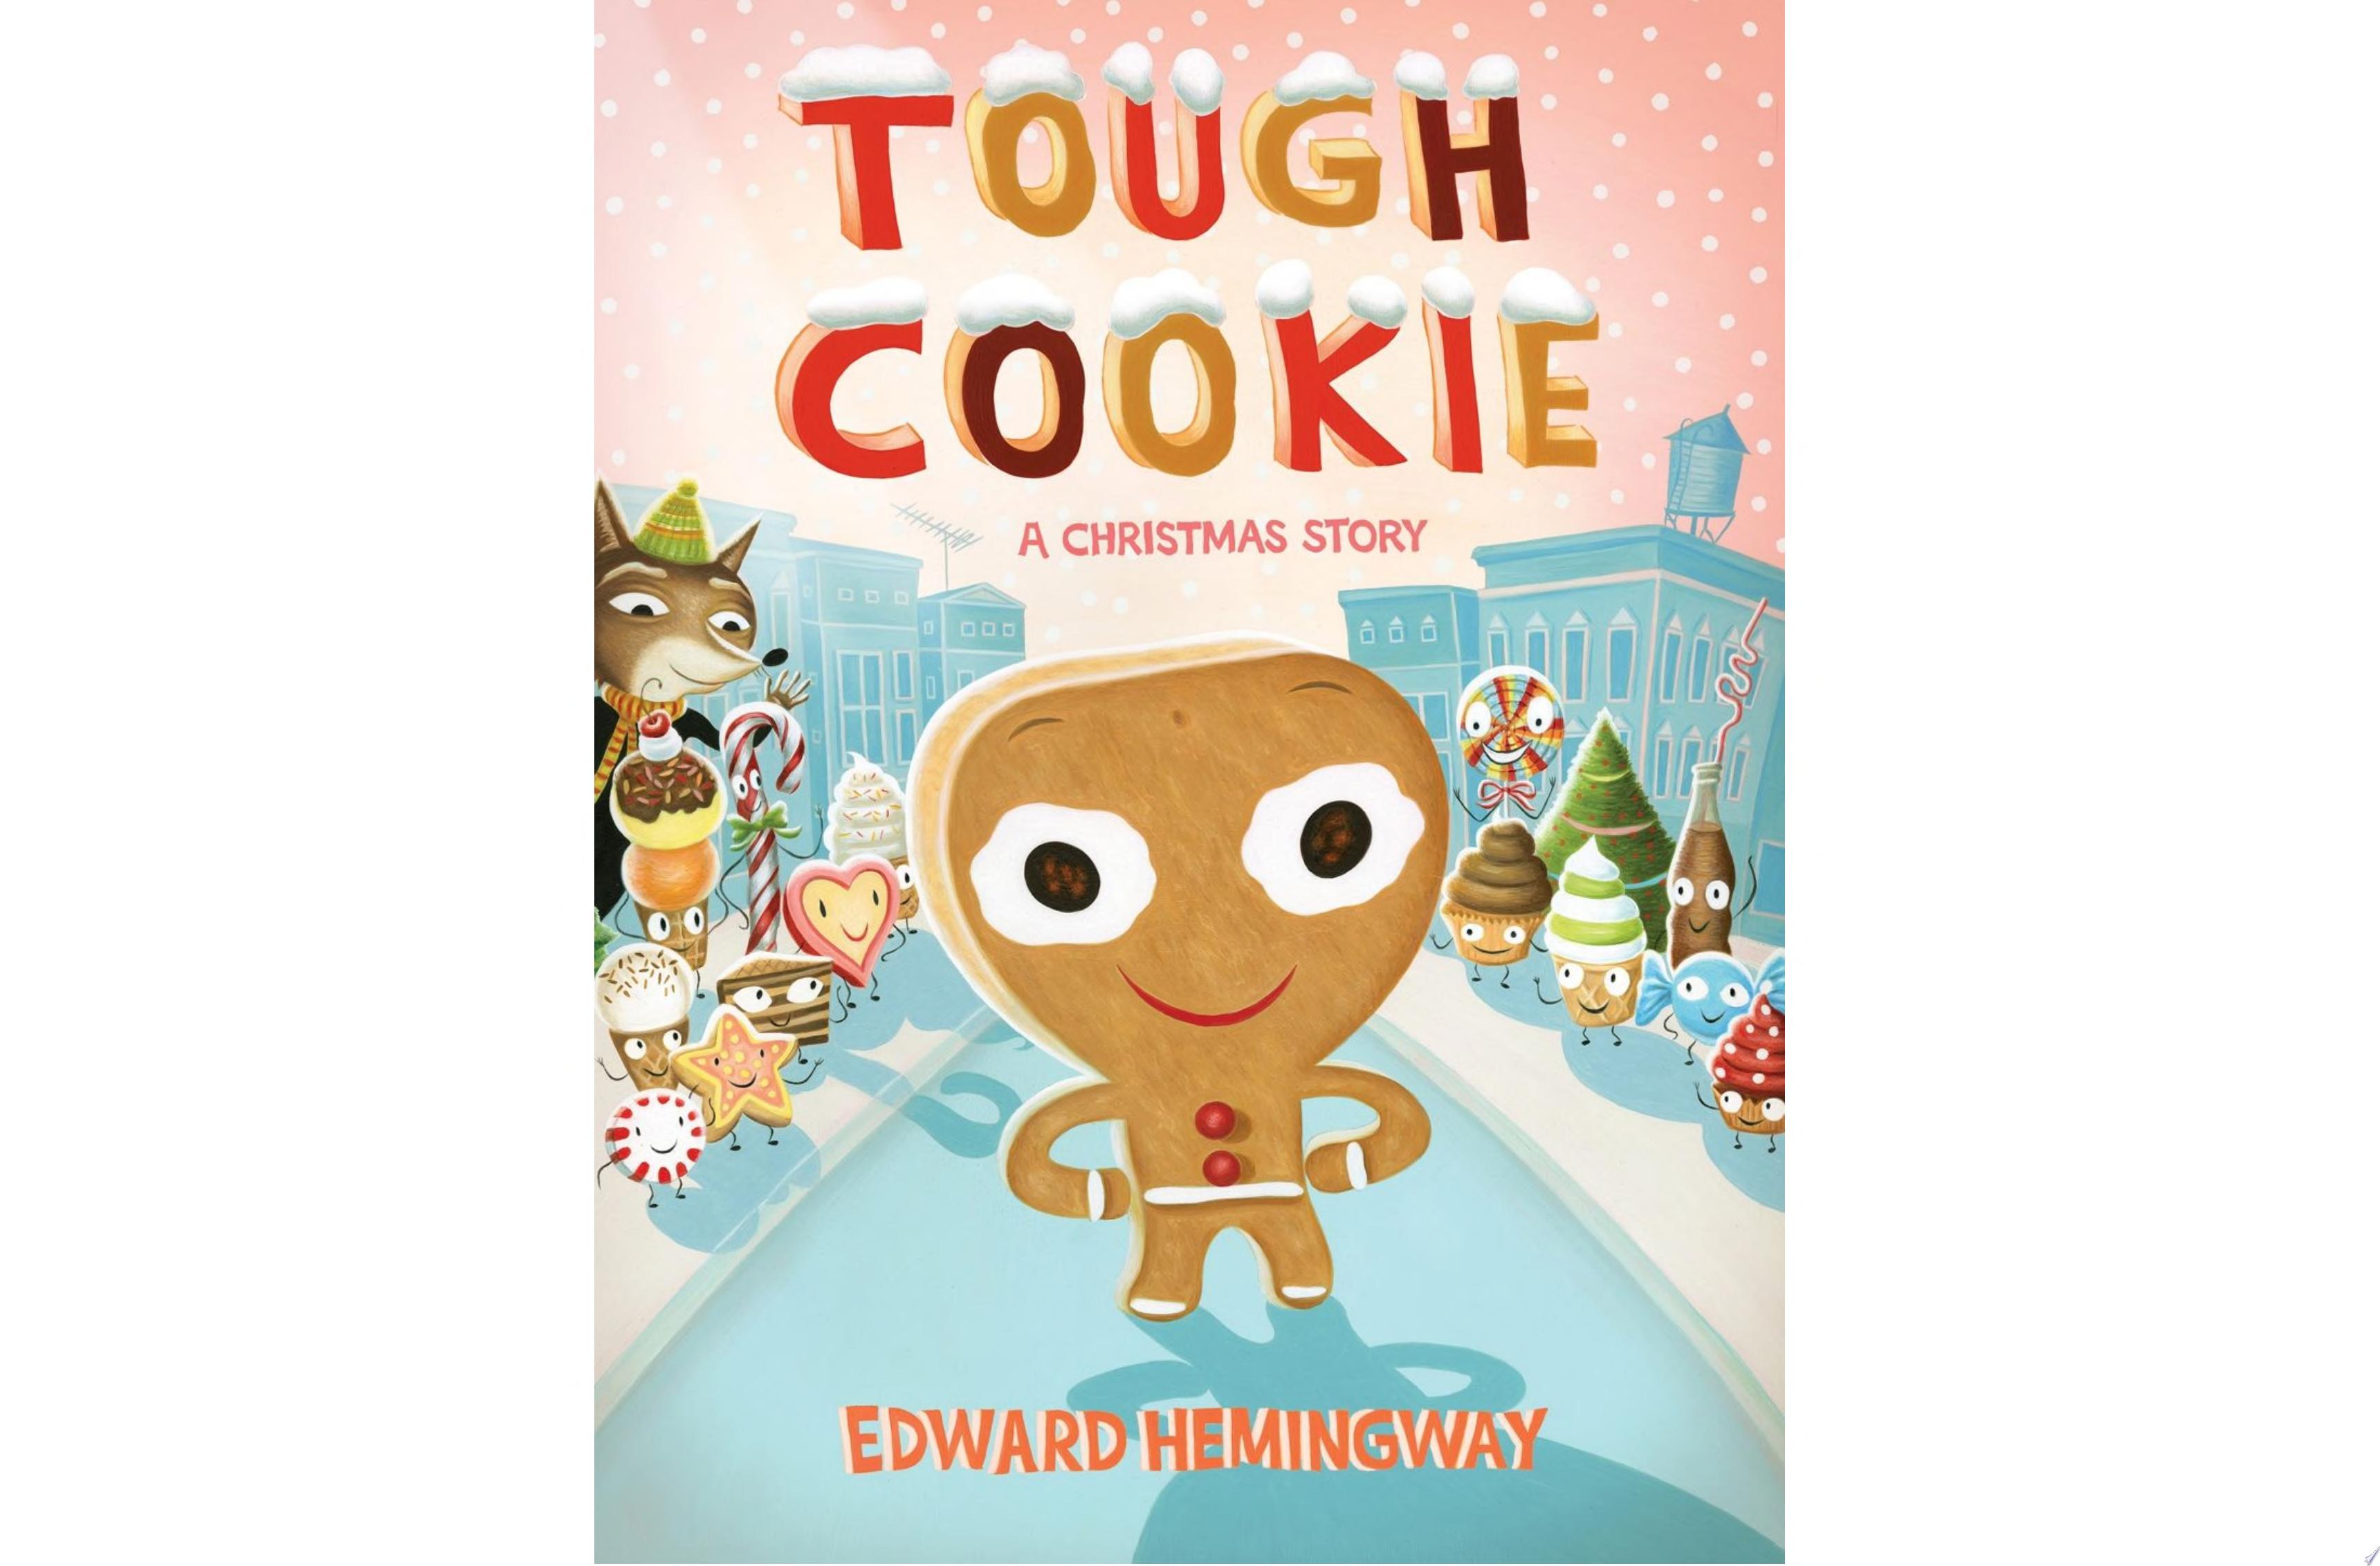 Image for "Tough Cookie"